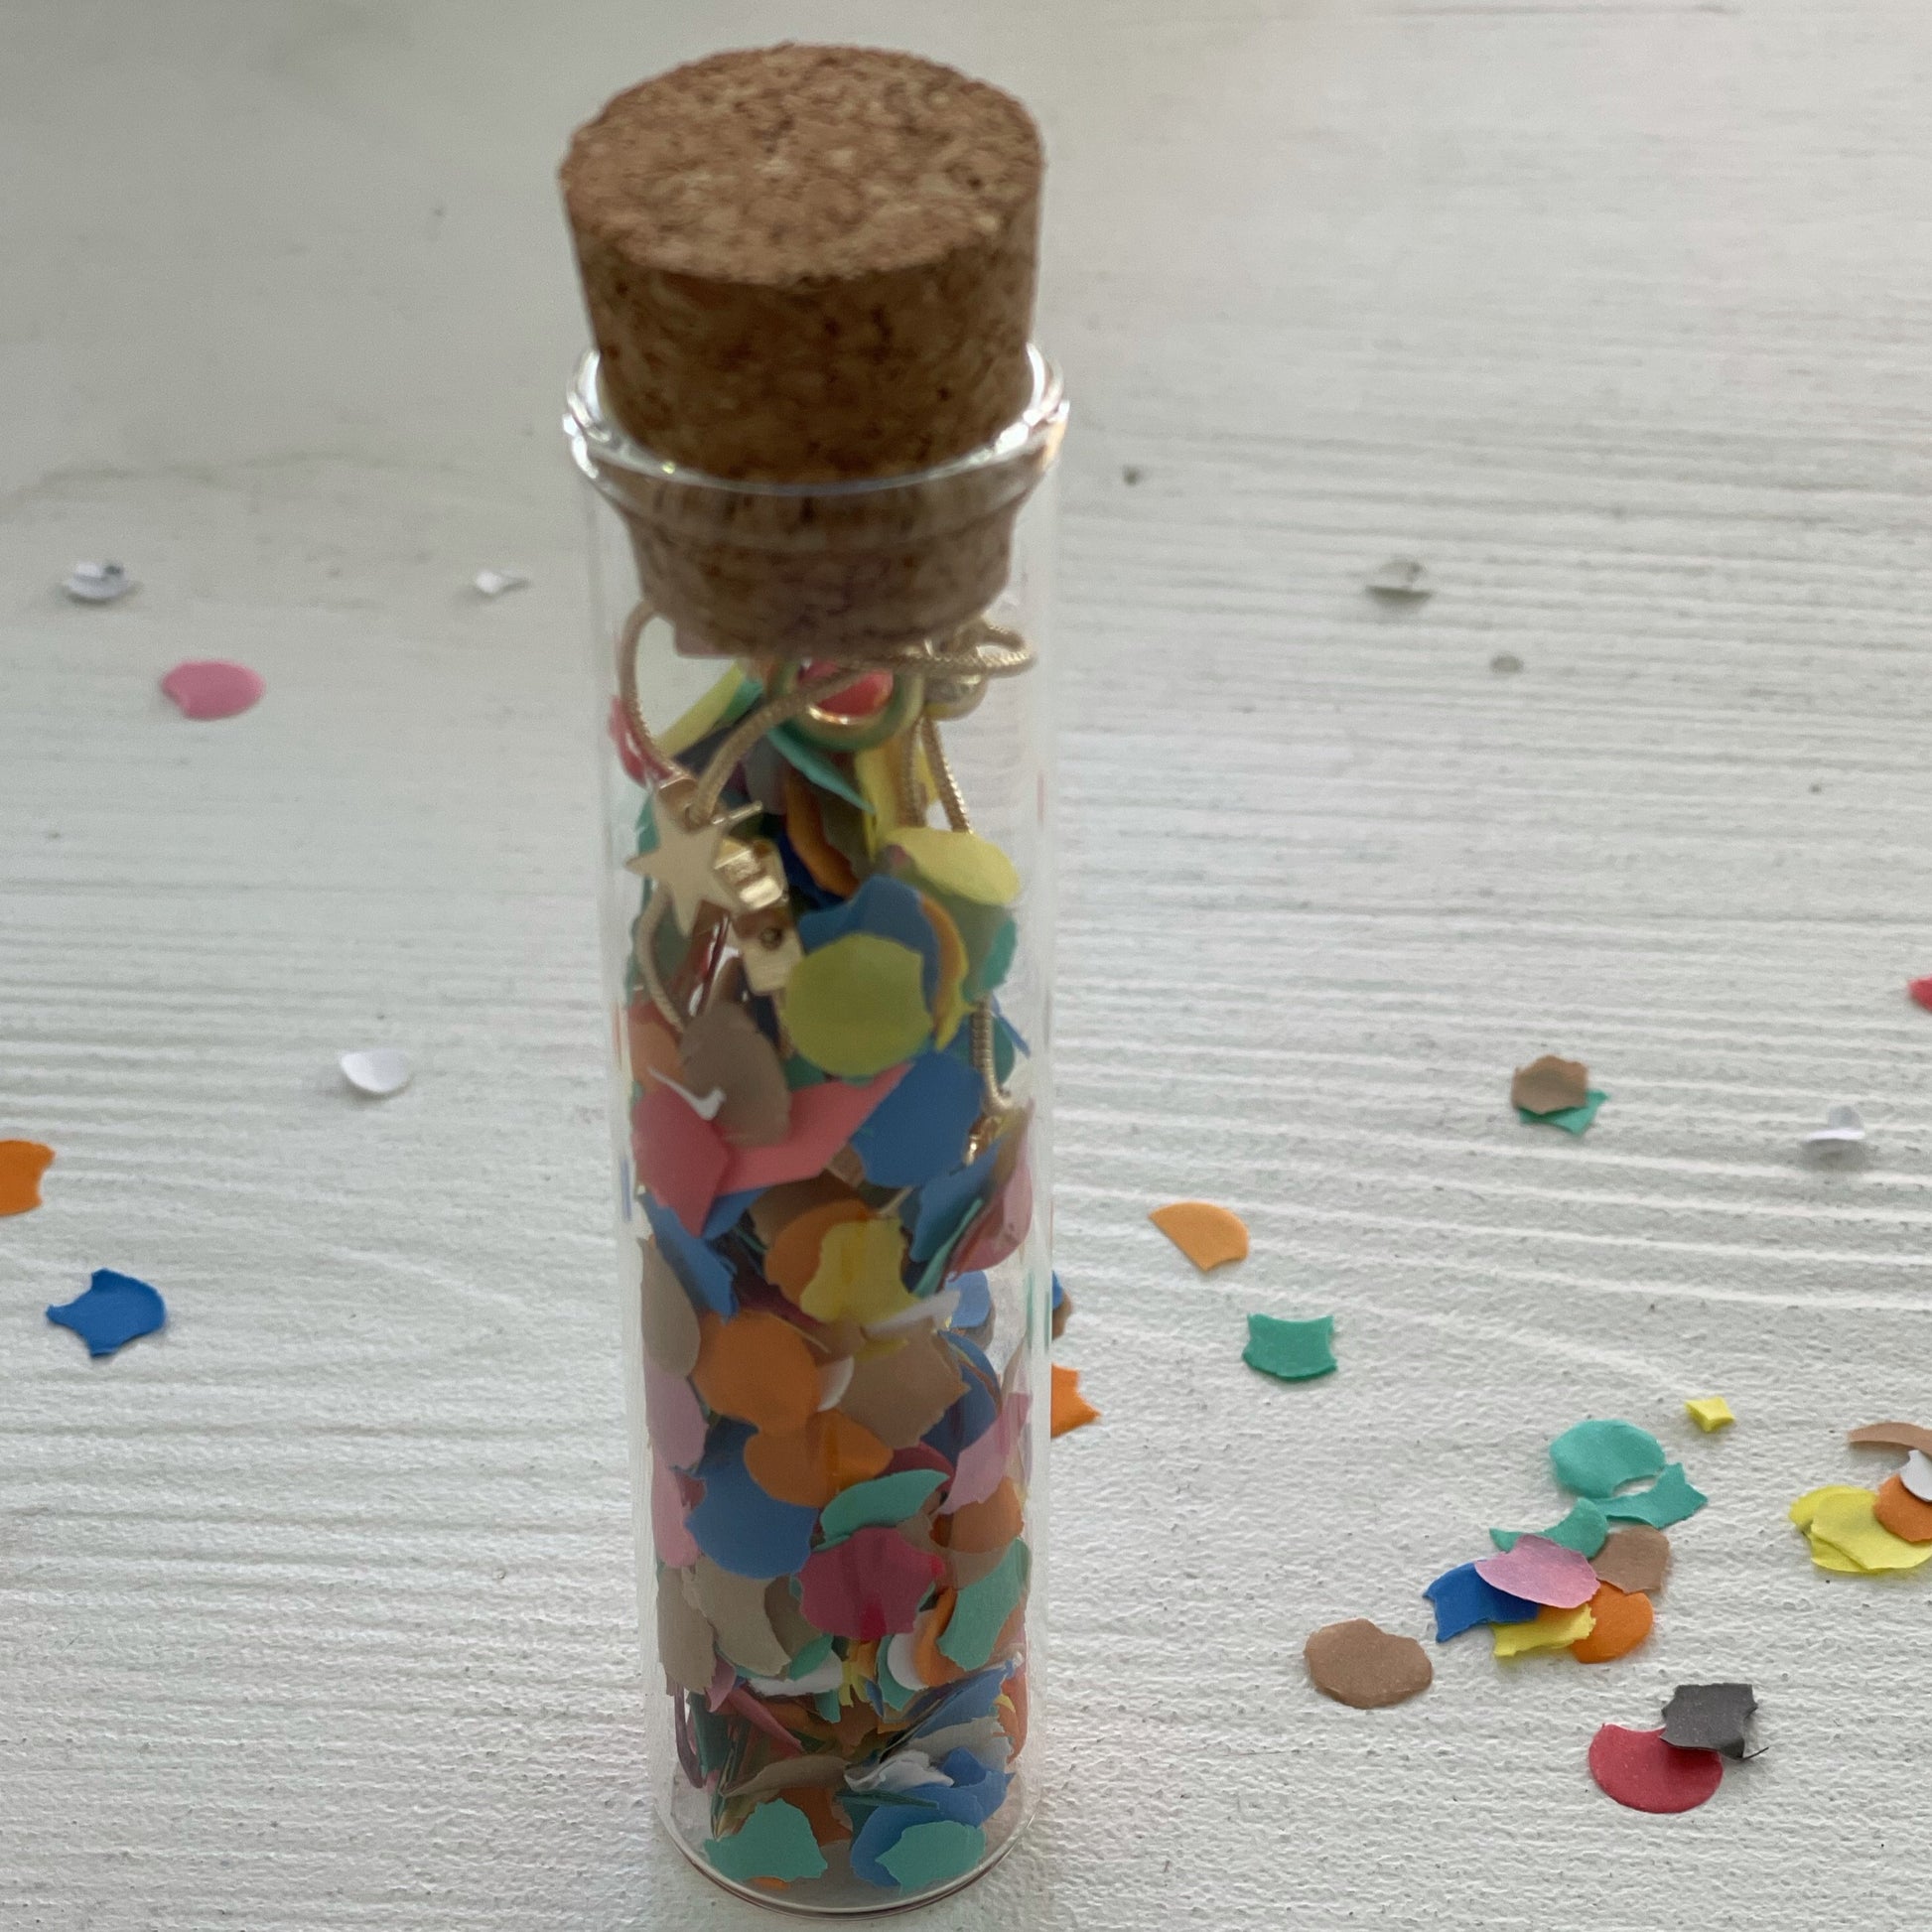 gold star bracelet in glass tube filled with confetti